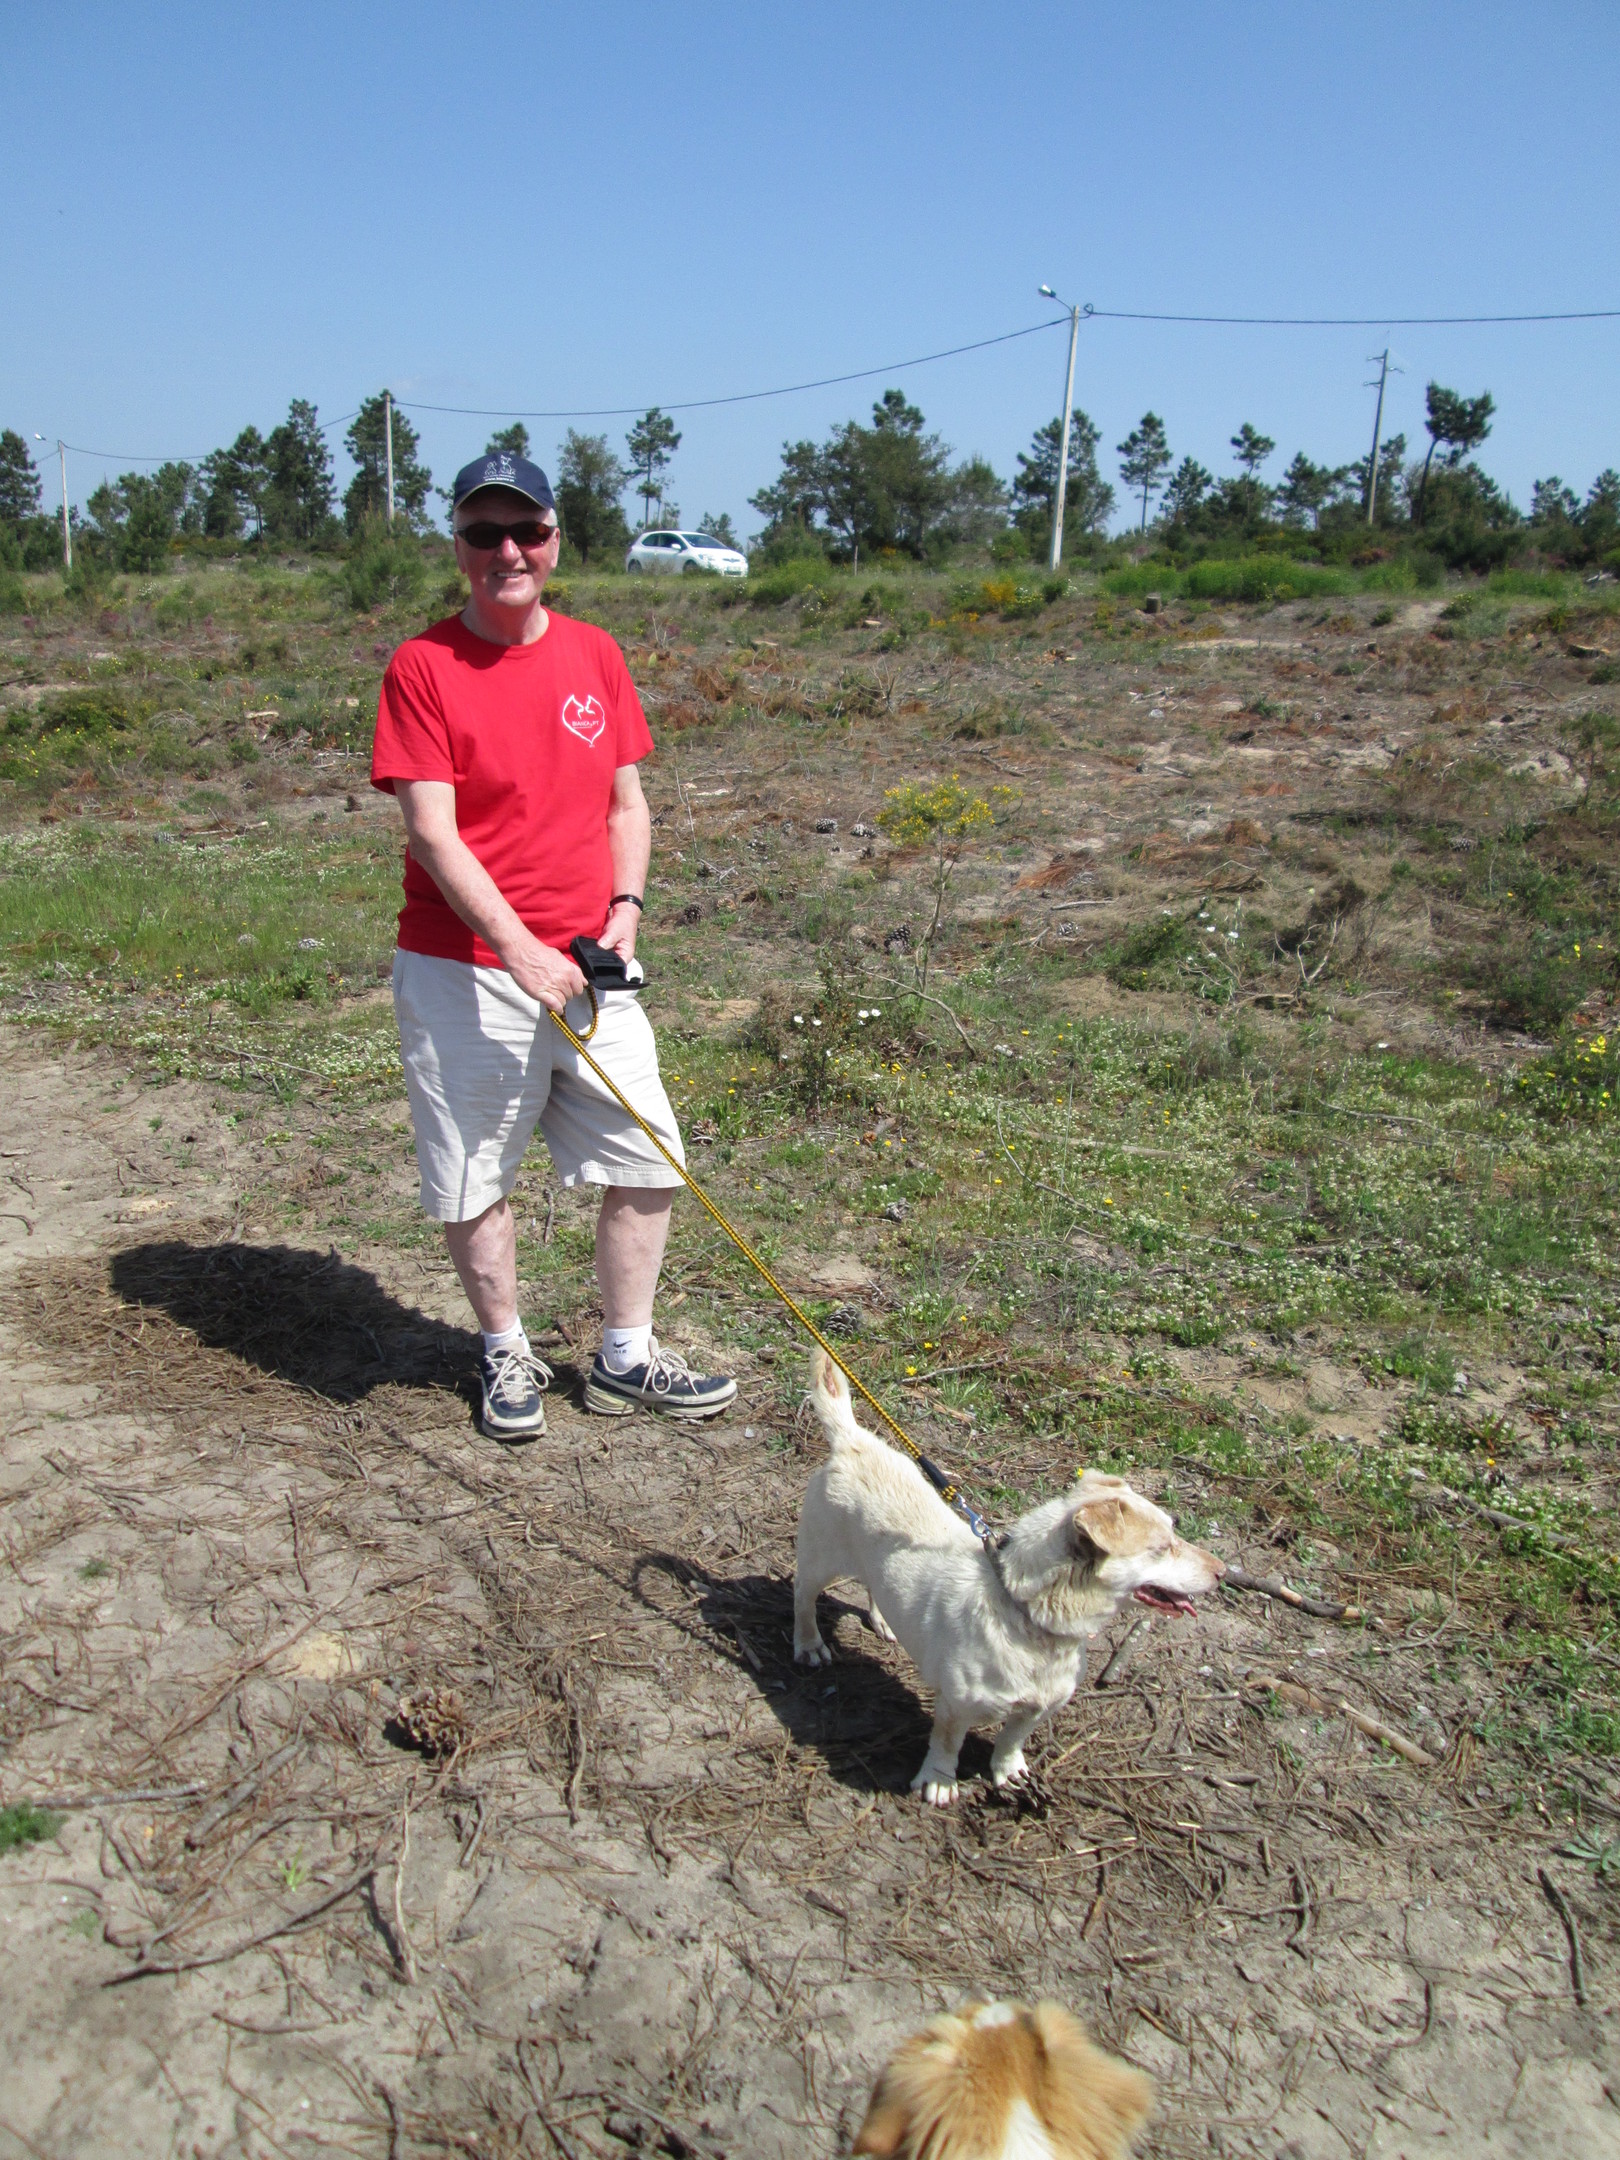 Mike Gibb has been helping rehome neglected dogs in Portugal for the last three years